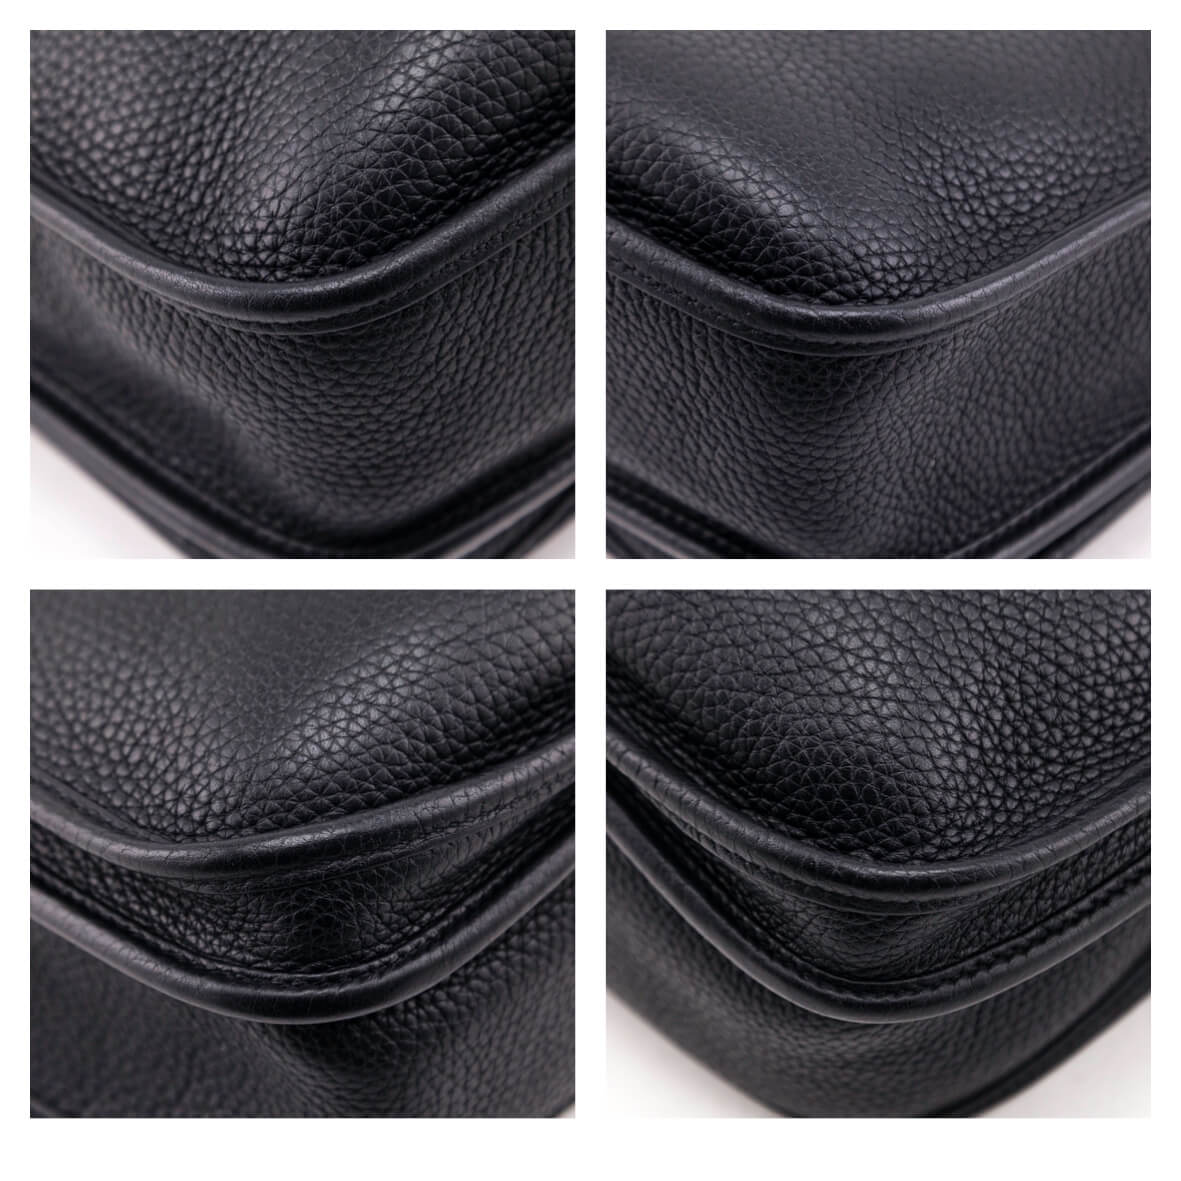 Replica Hermes Evelyne III 29 PM Bag In Black Clemence Leather